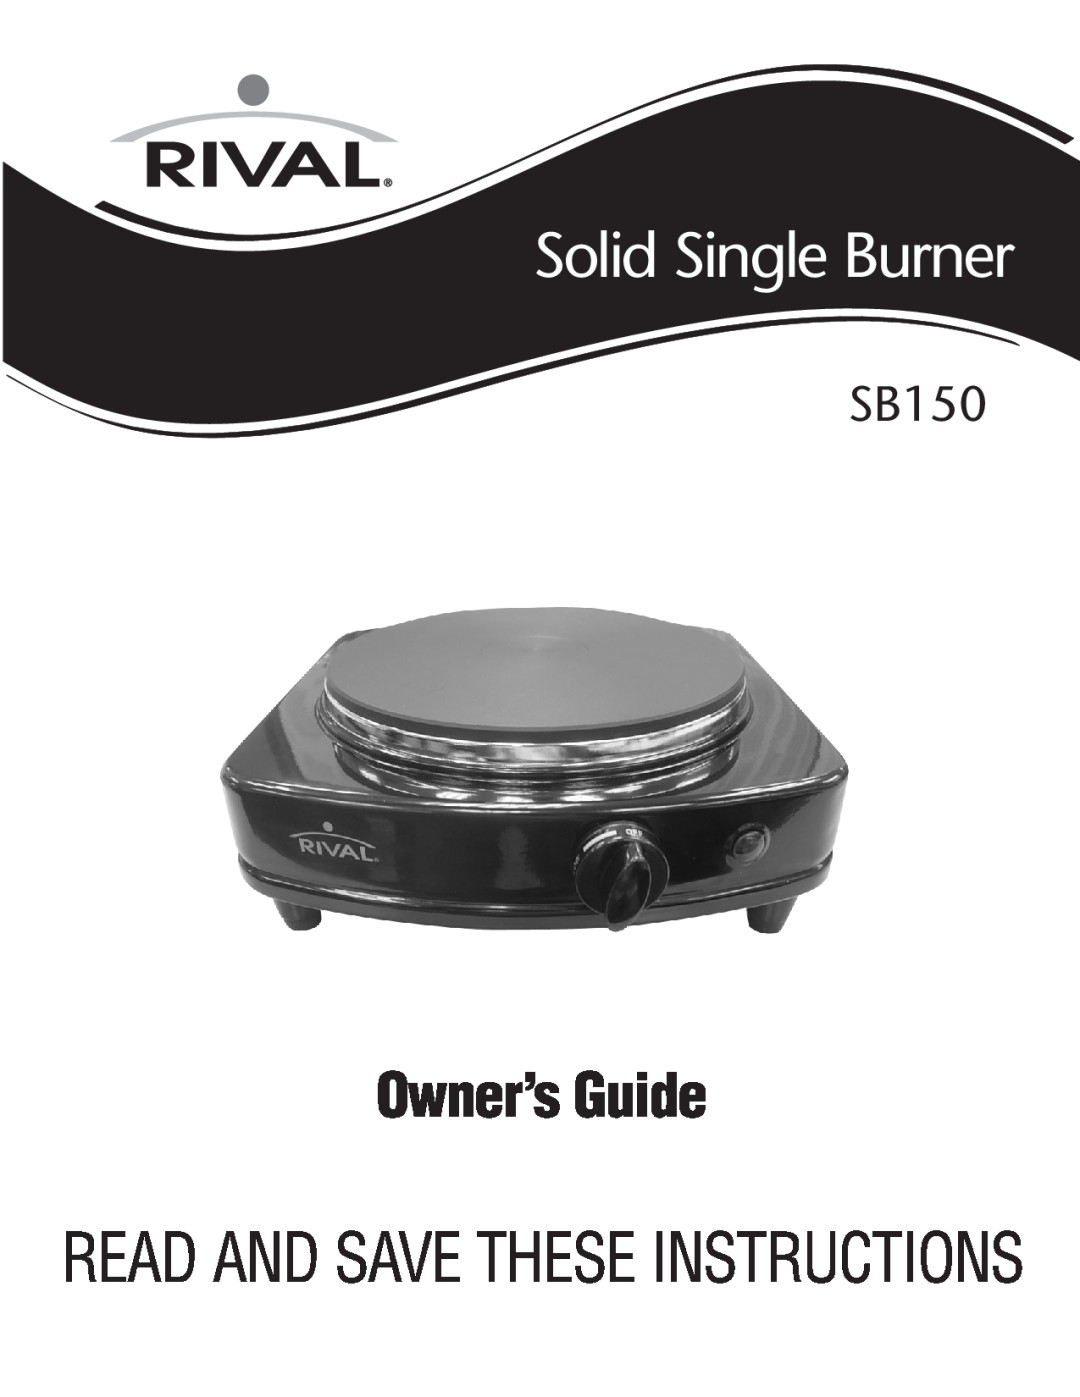 Rival SB150 manual Solid Single Burner, Owner’sGuide, Read And Save These Instructions 